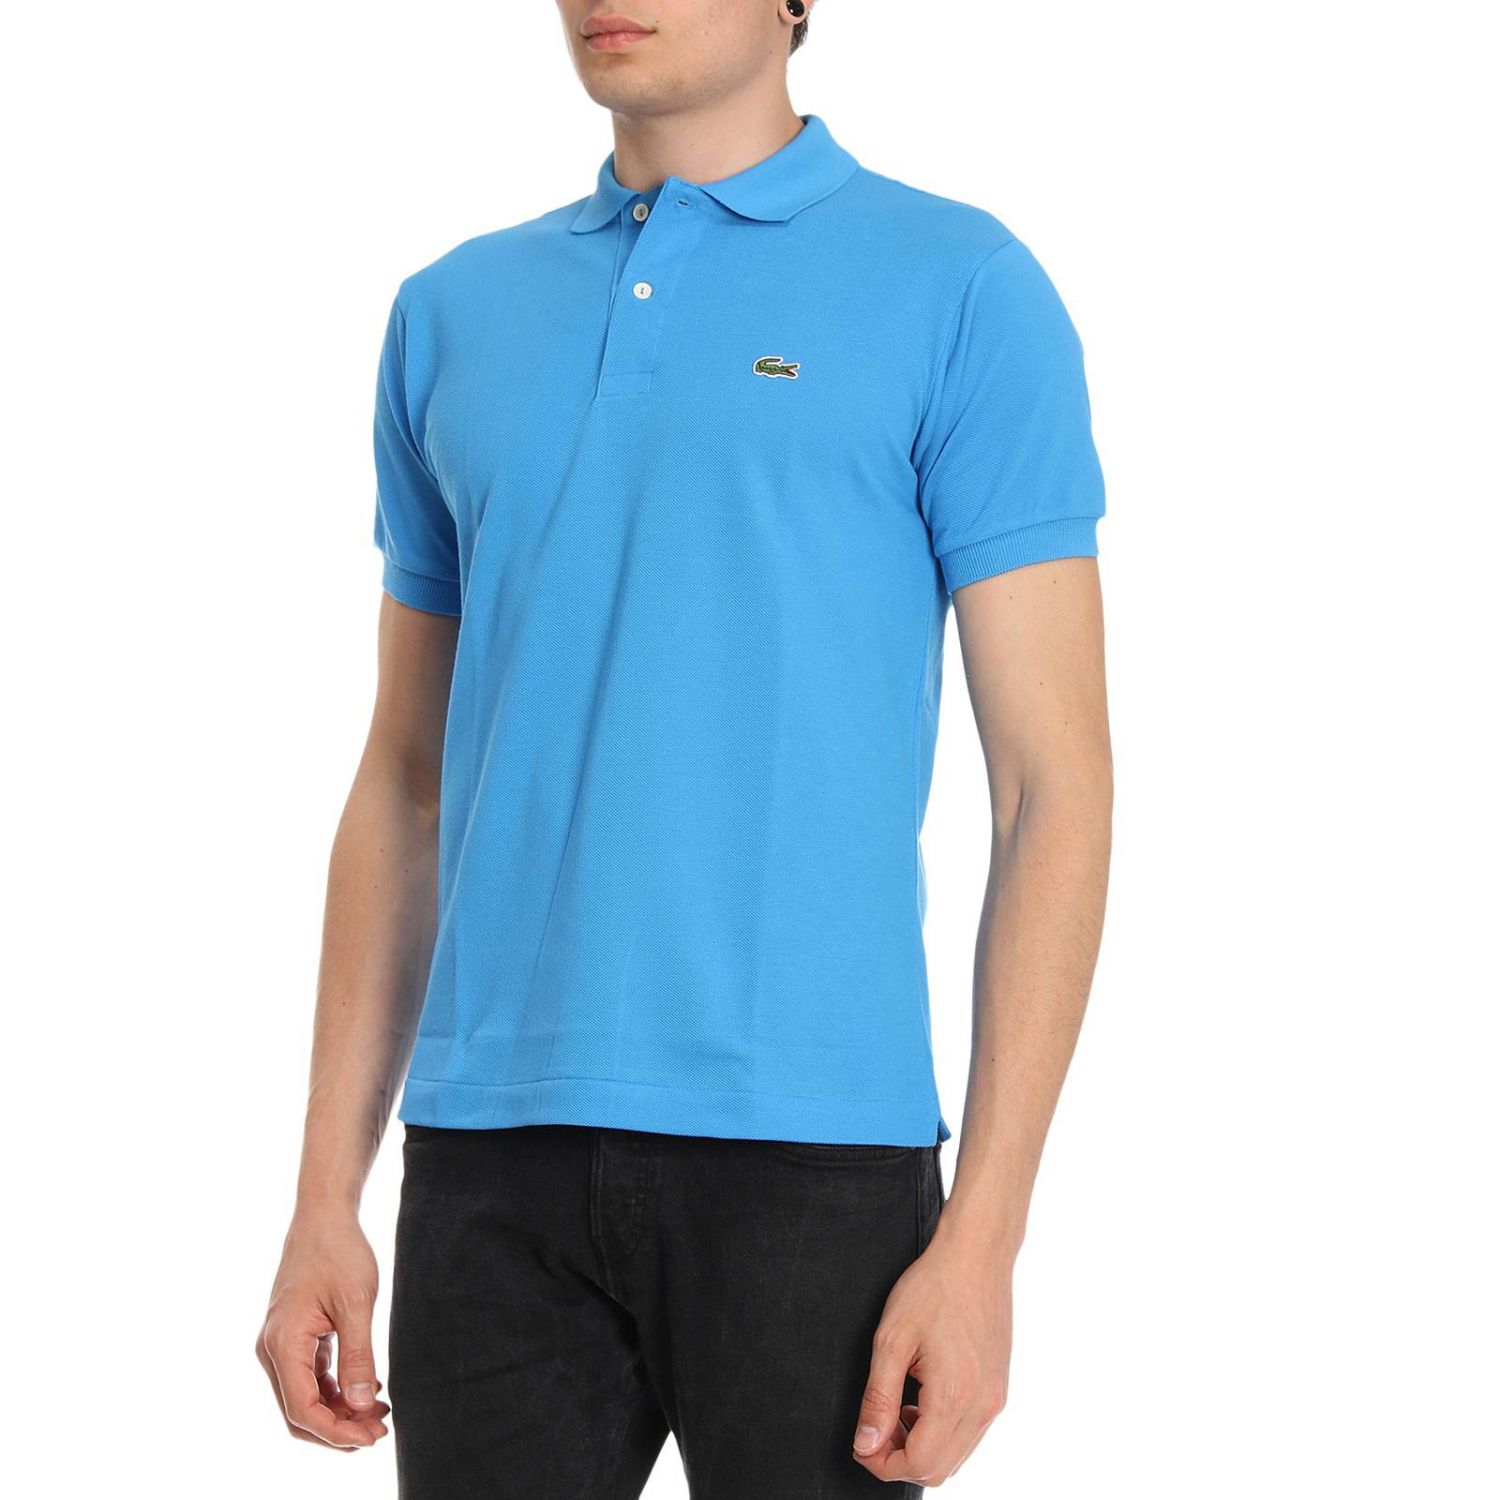 Lacoste Outlet: T-shirt men - Gnawed Blue | T-Shirt Lacoste 1212 GIGLIO.COM